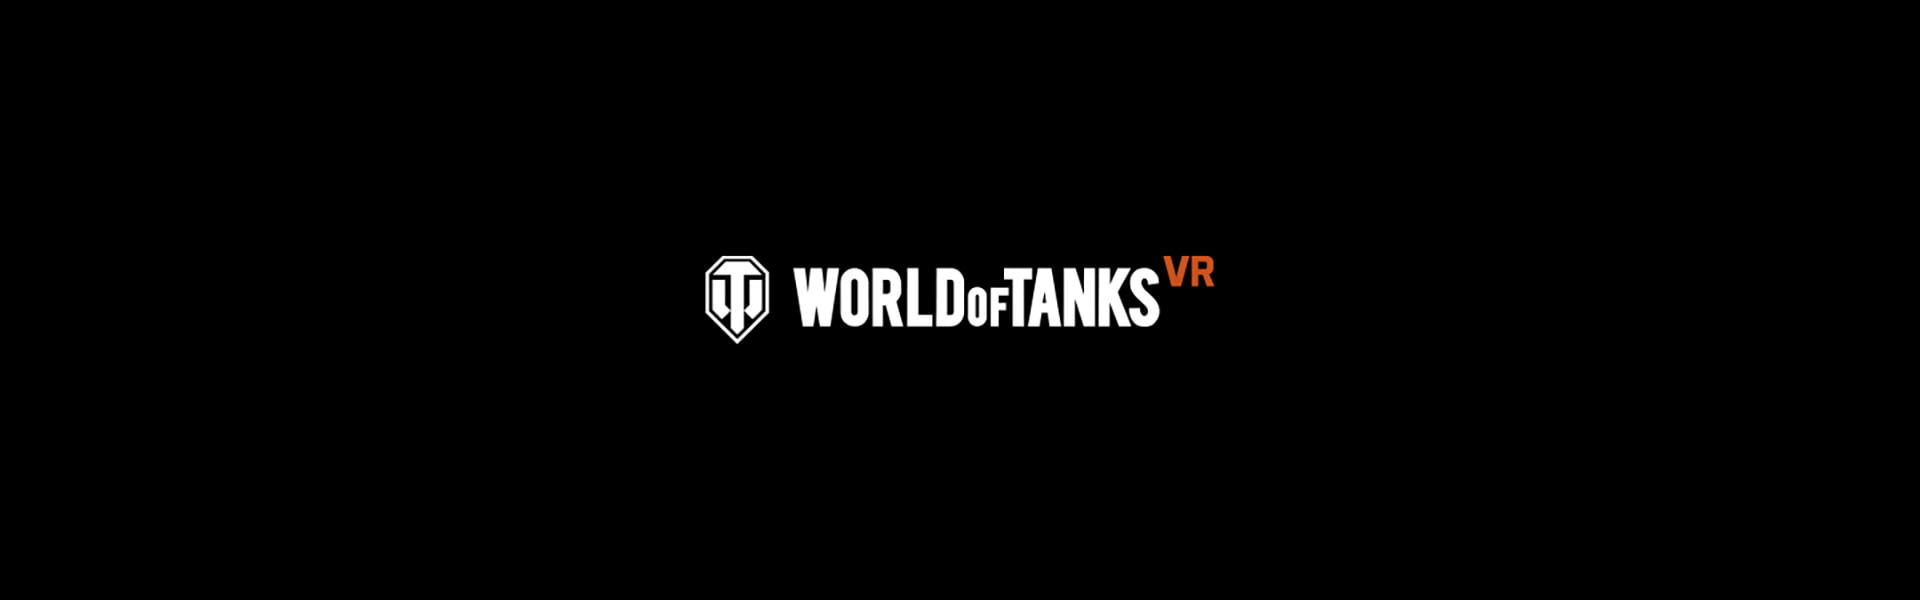 Wargaming blasts into the VR market with World of Tanks VR 14